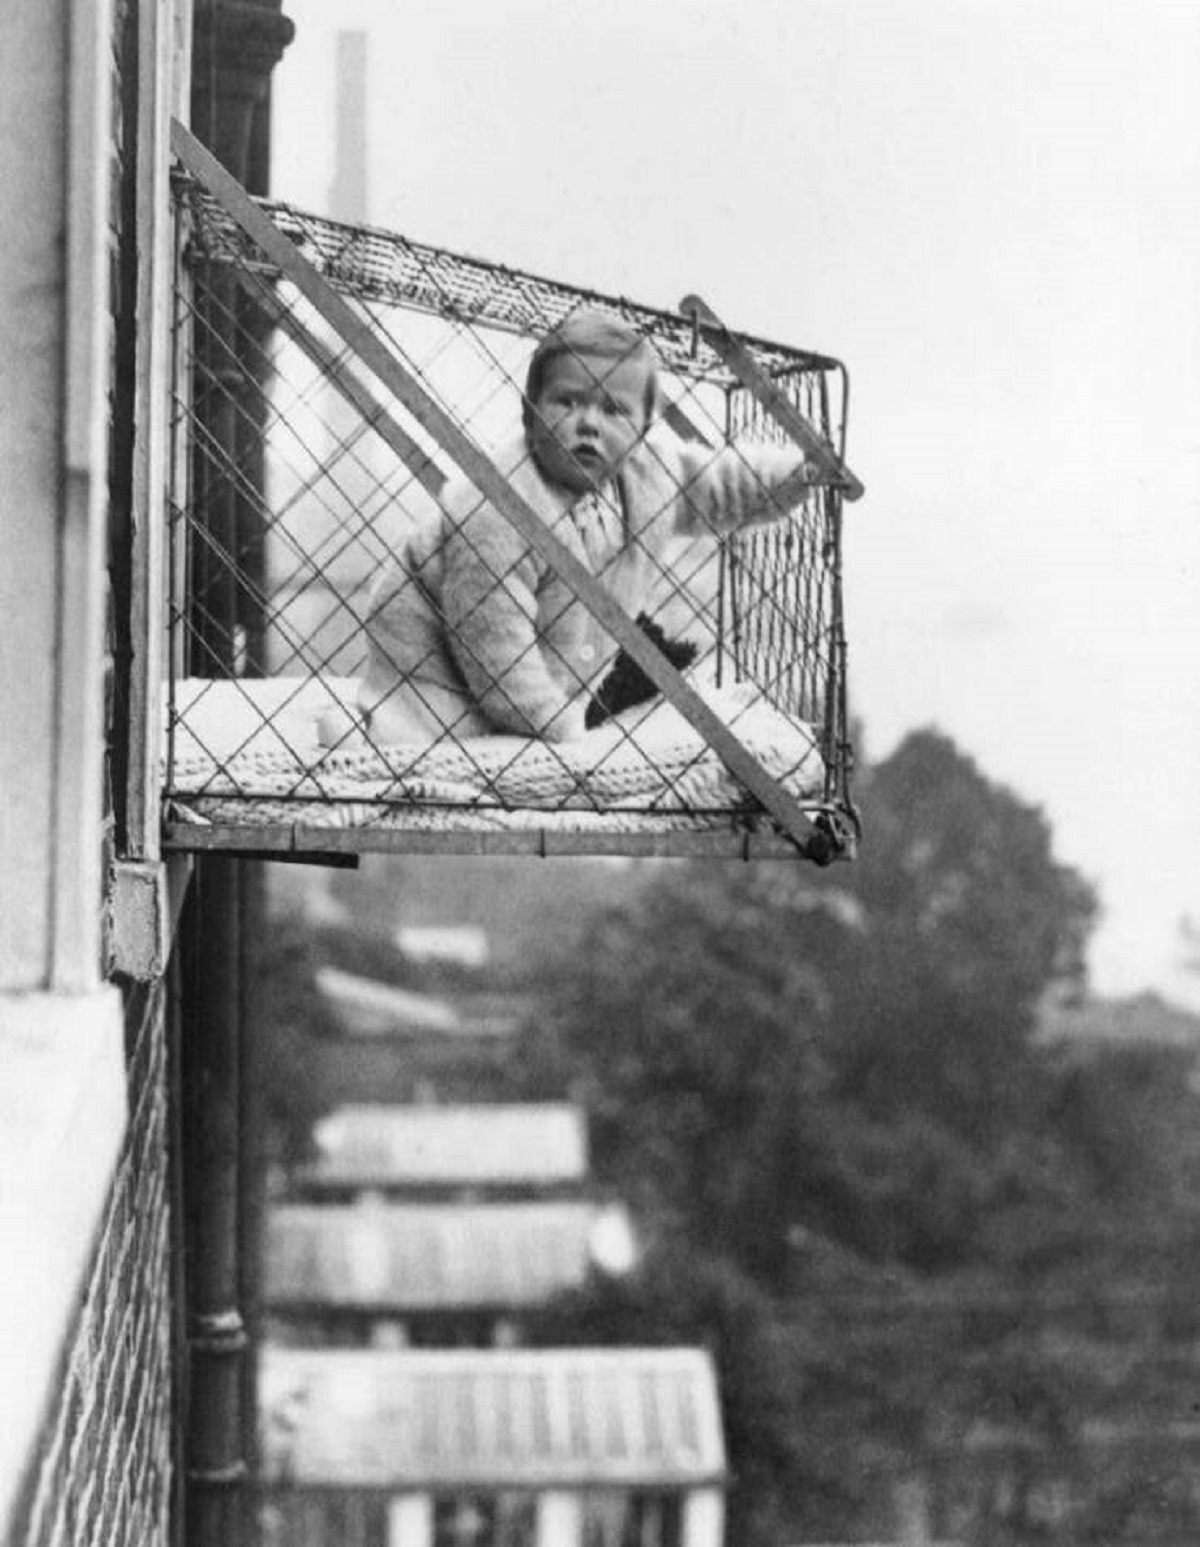 baby cage window